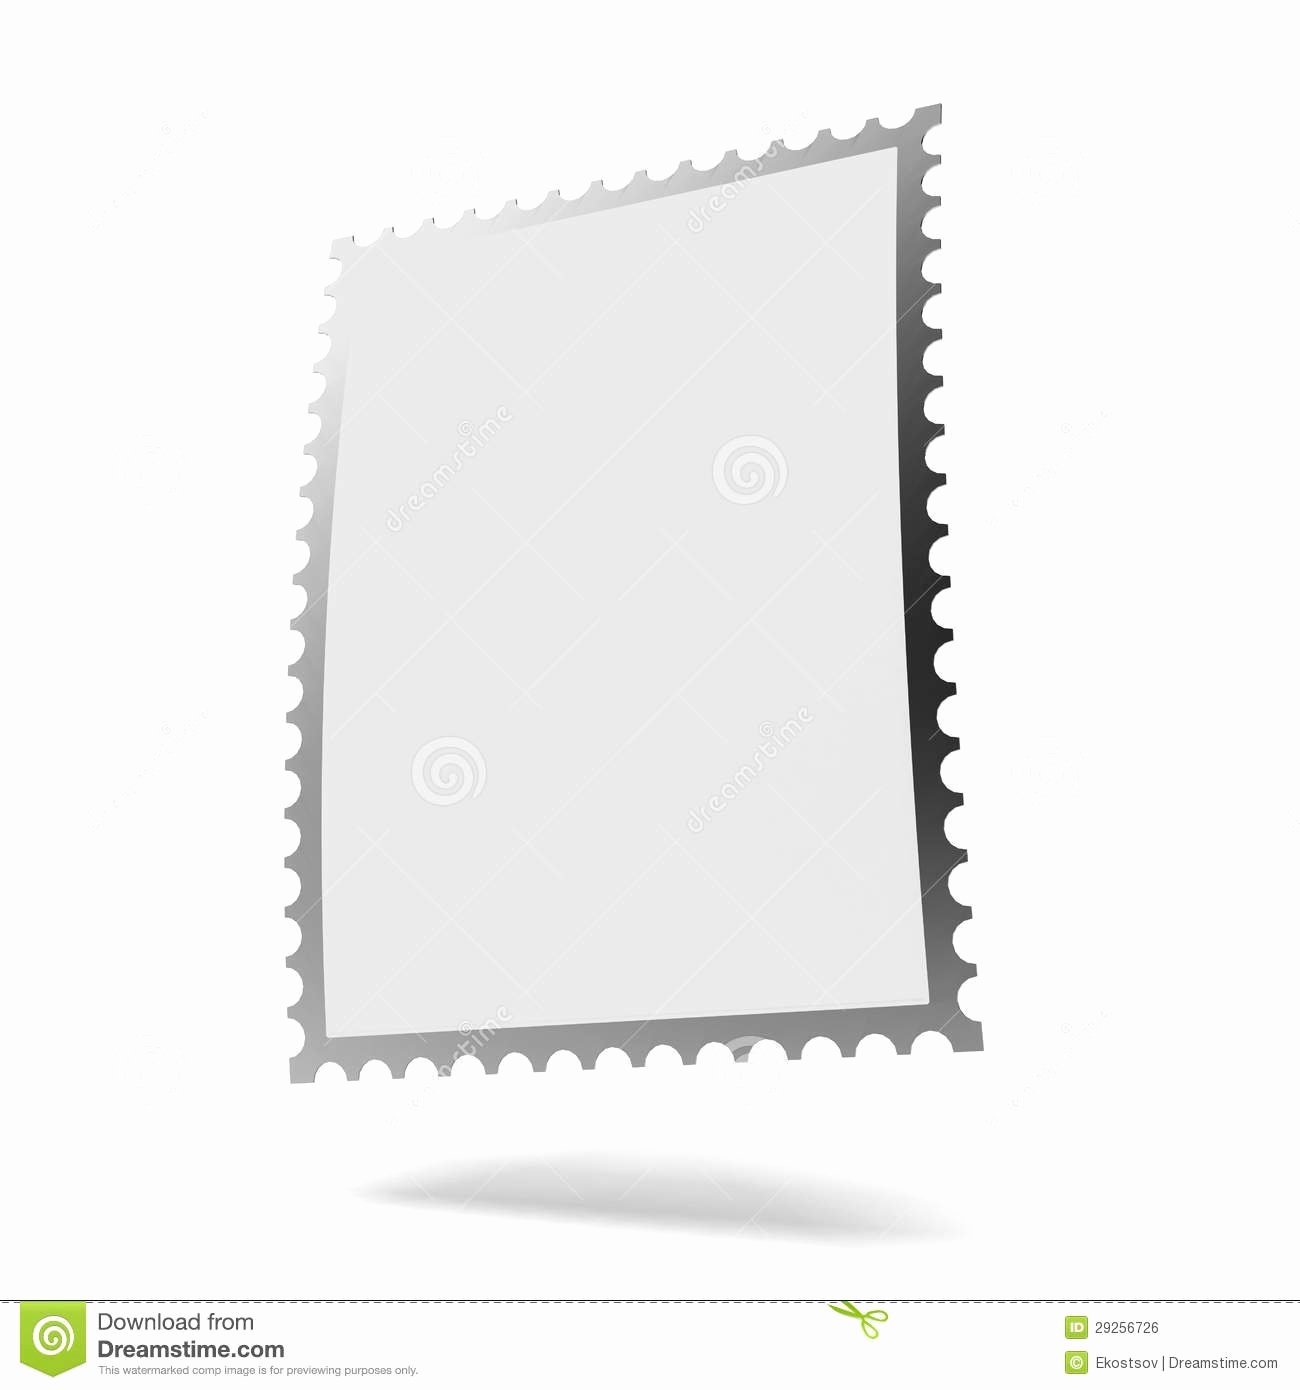 Blank Stamp Template Fresh Blank Stamp Template White Stock Illustrations – 2 954